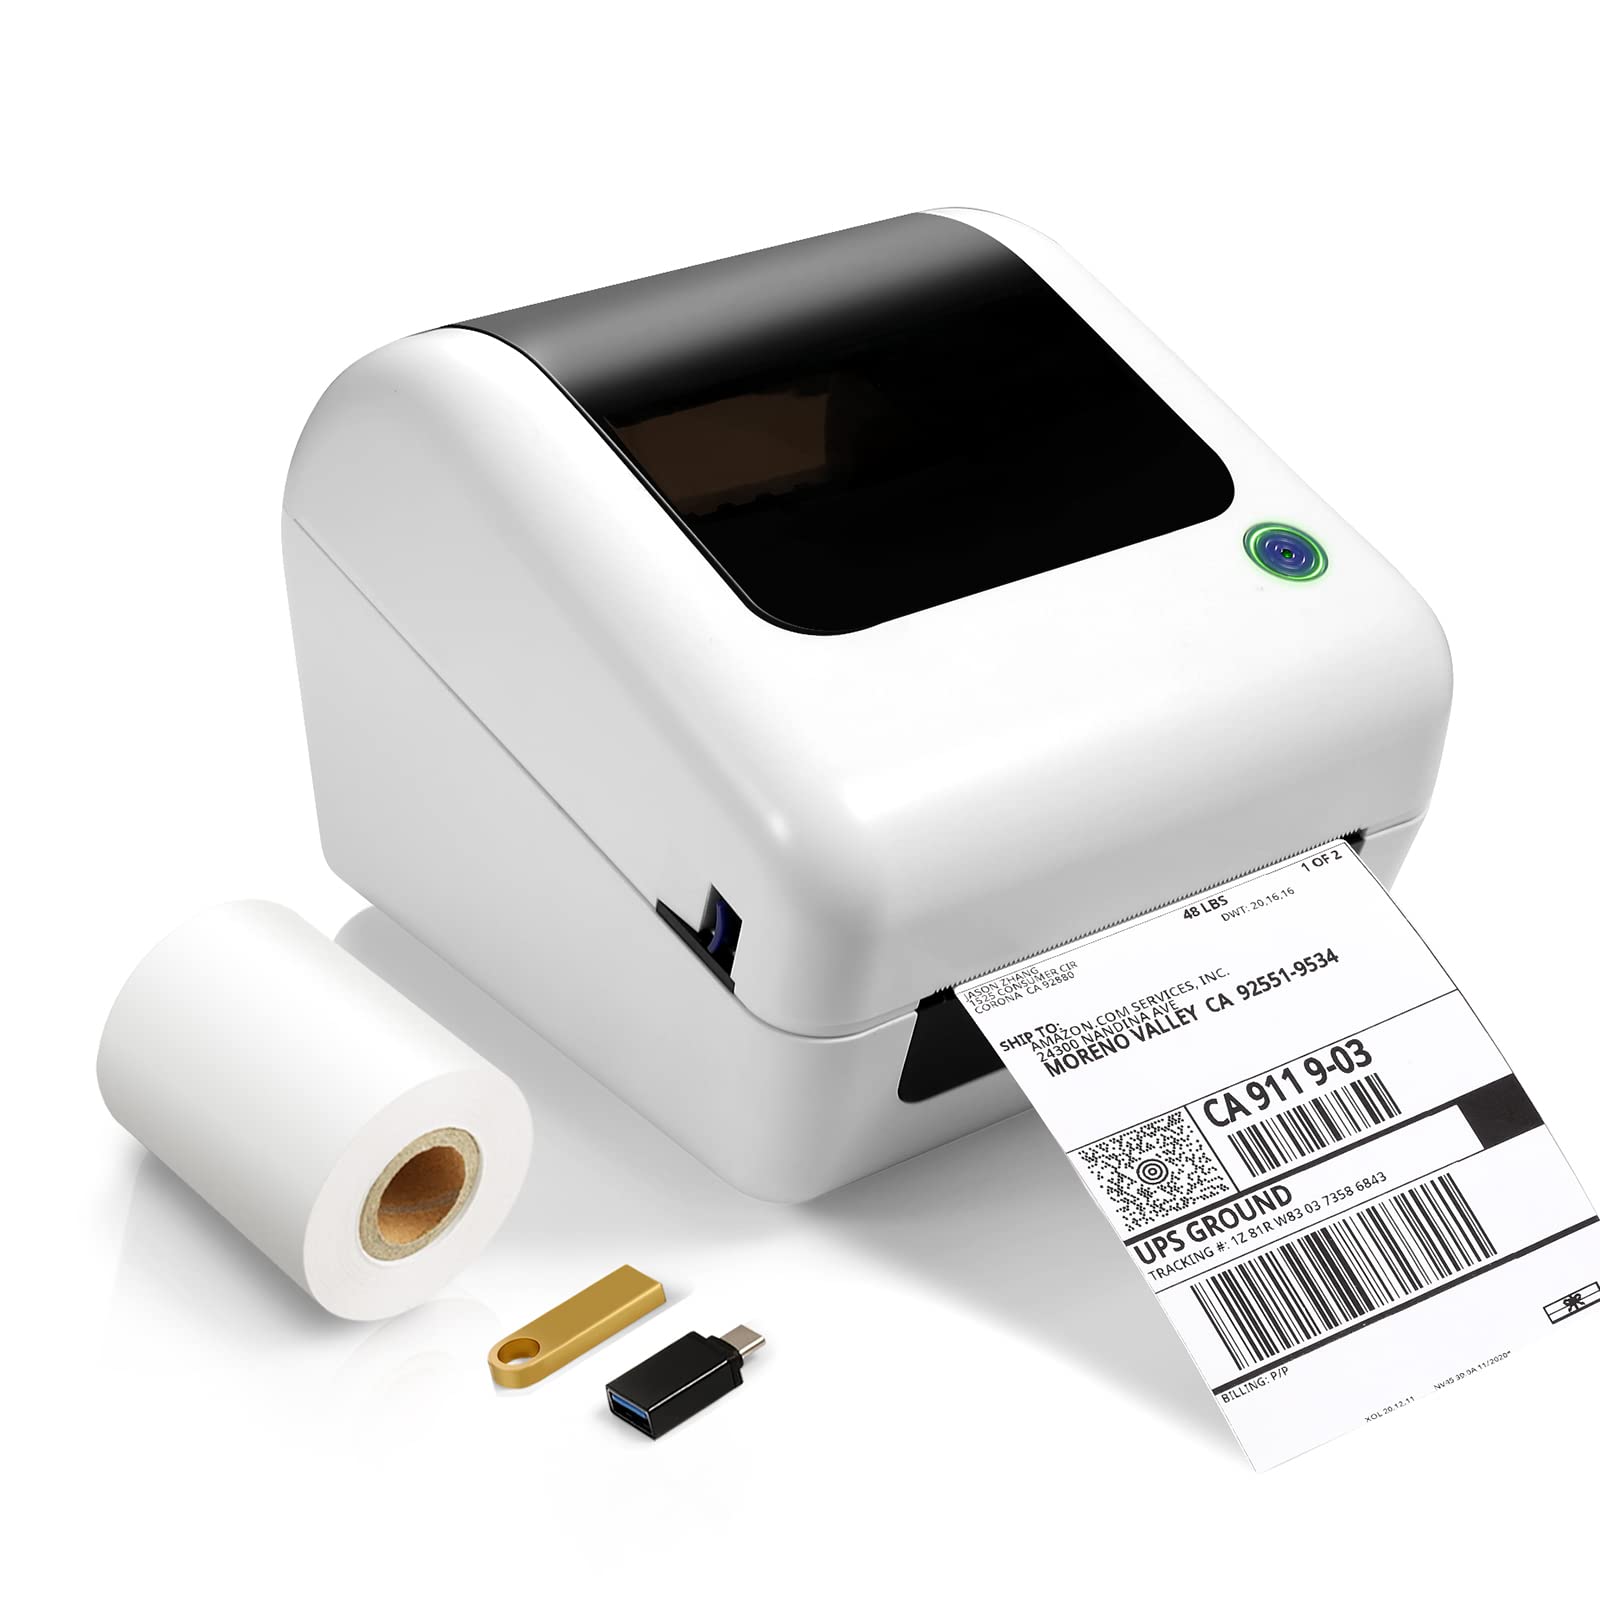 Bluetooth Thermal Shipping Label Printer - Wireless 4x6 Label Maker for packages, Compatible with iPhone and PC, Phone, USB for MAC, Works with Ebay, Amazon, Shopify, Etsy, UPS, USPS Barcode, Upgrade